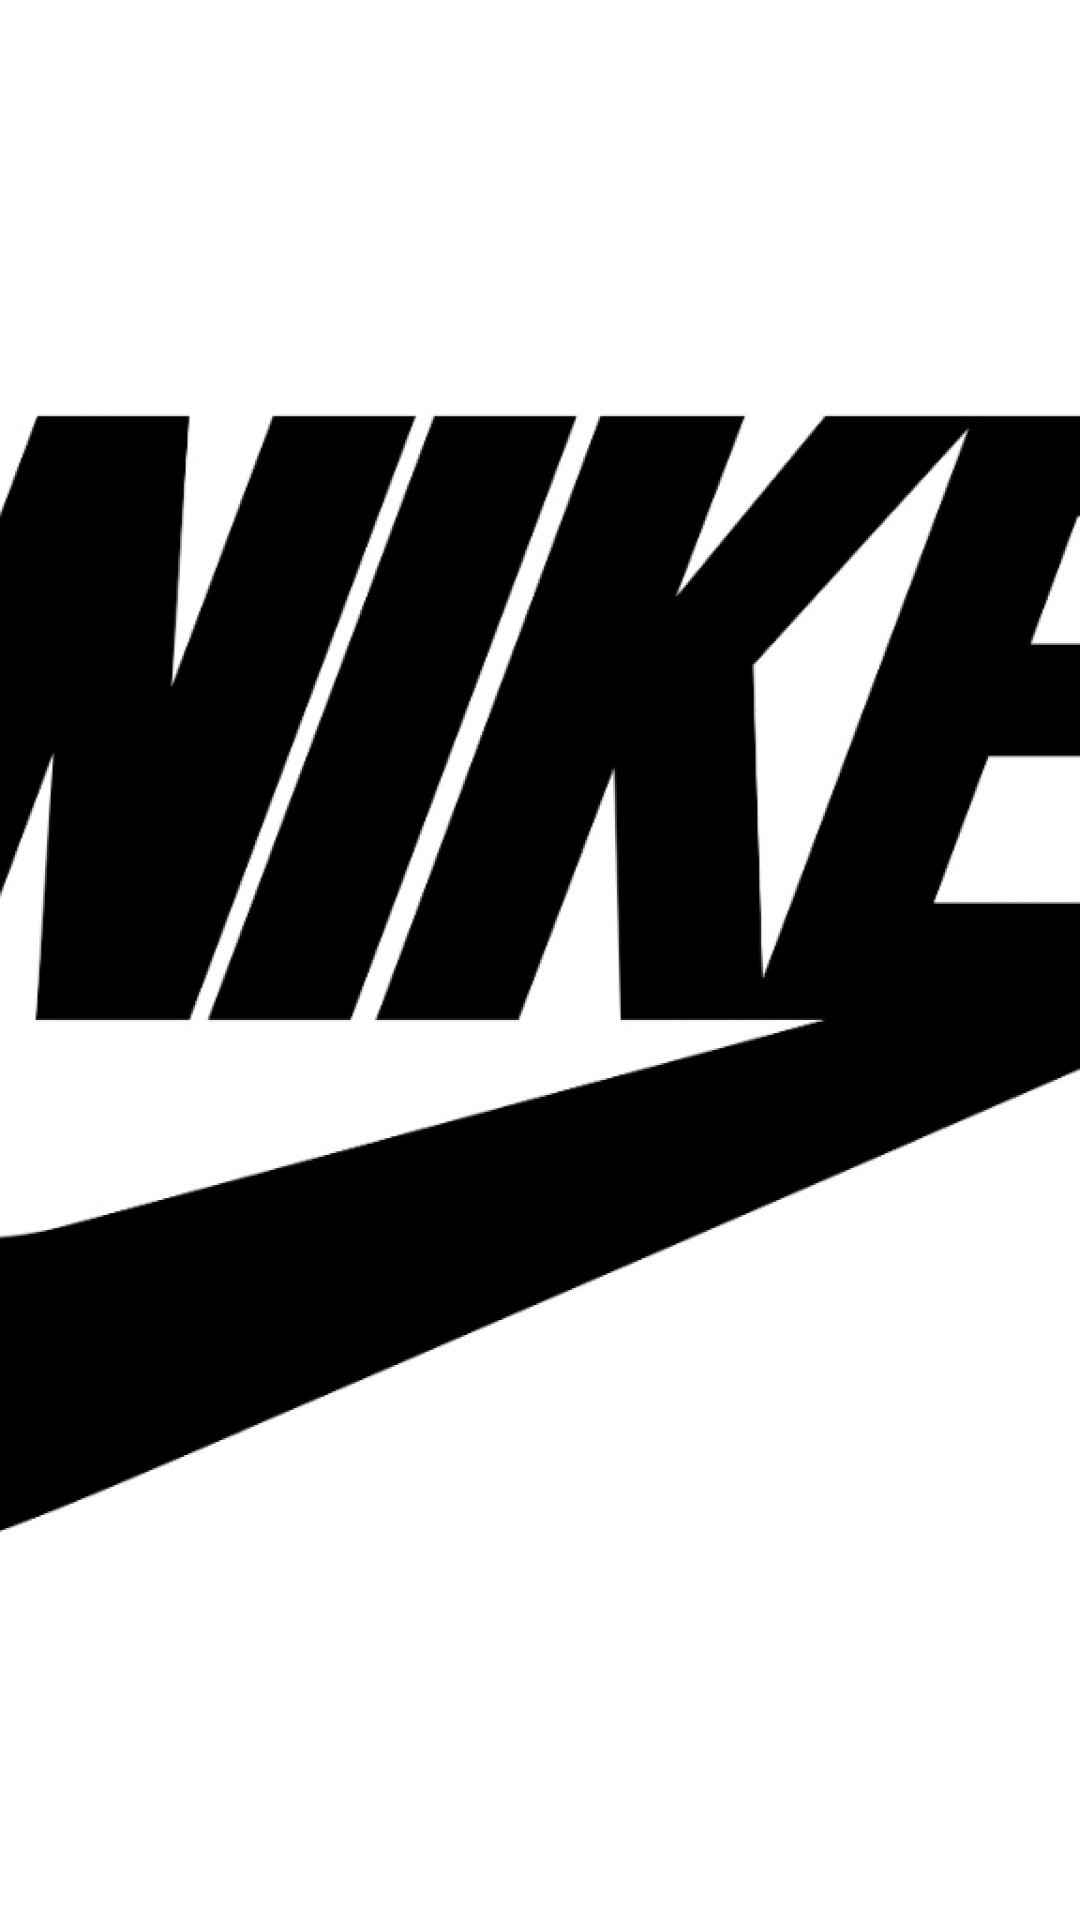 Nike Wallpaper for Iphone 1080×1920.